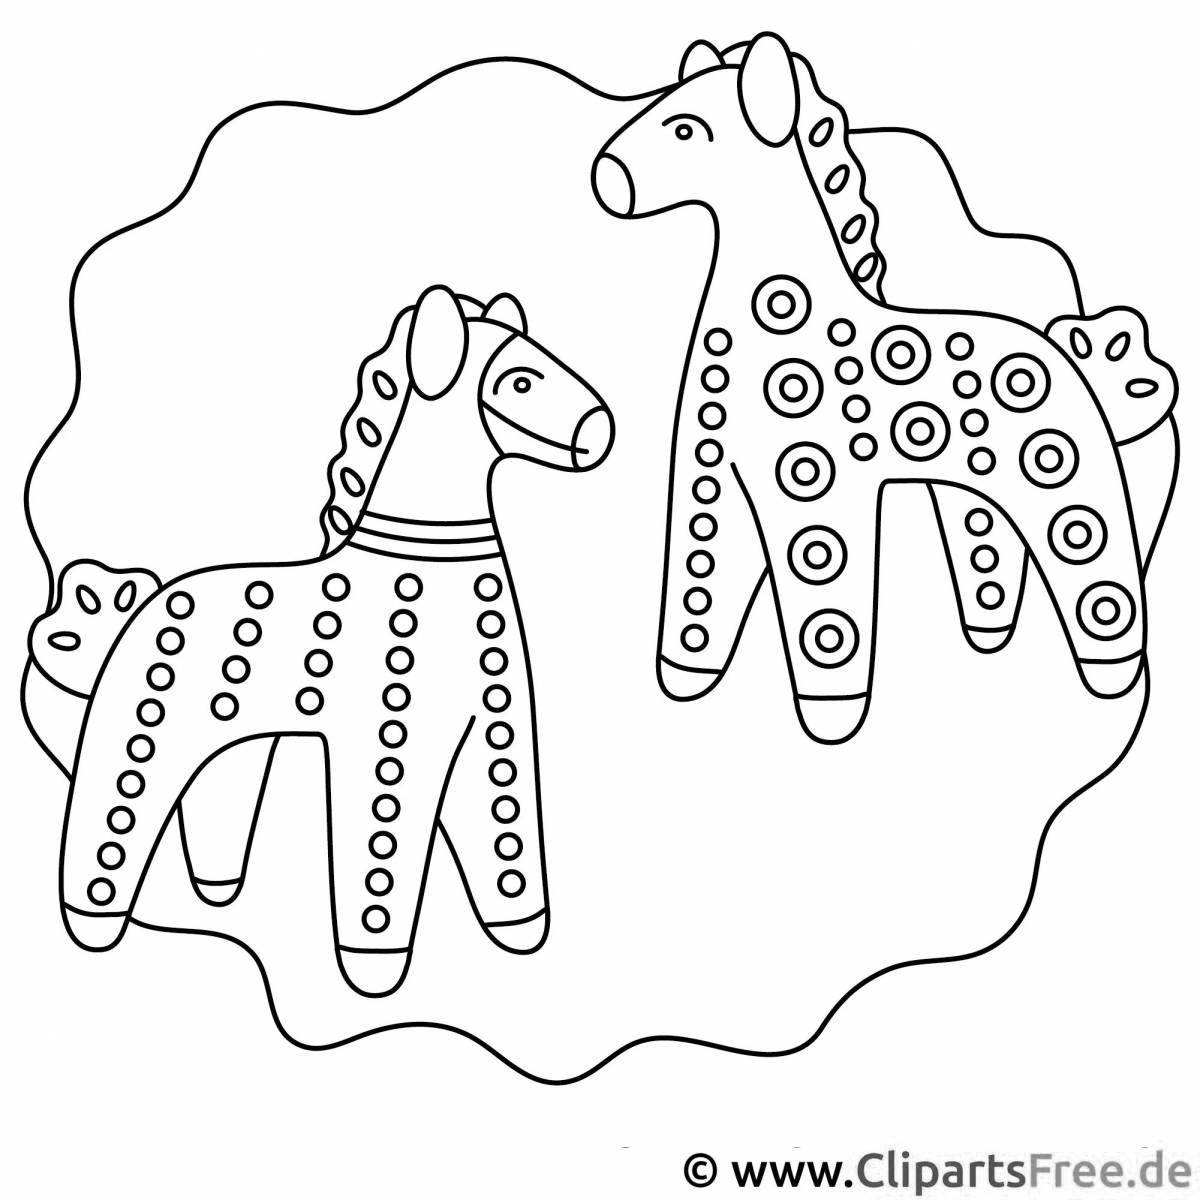 Colorful Dymkovo toy horse coloring book